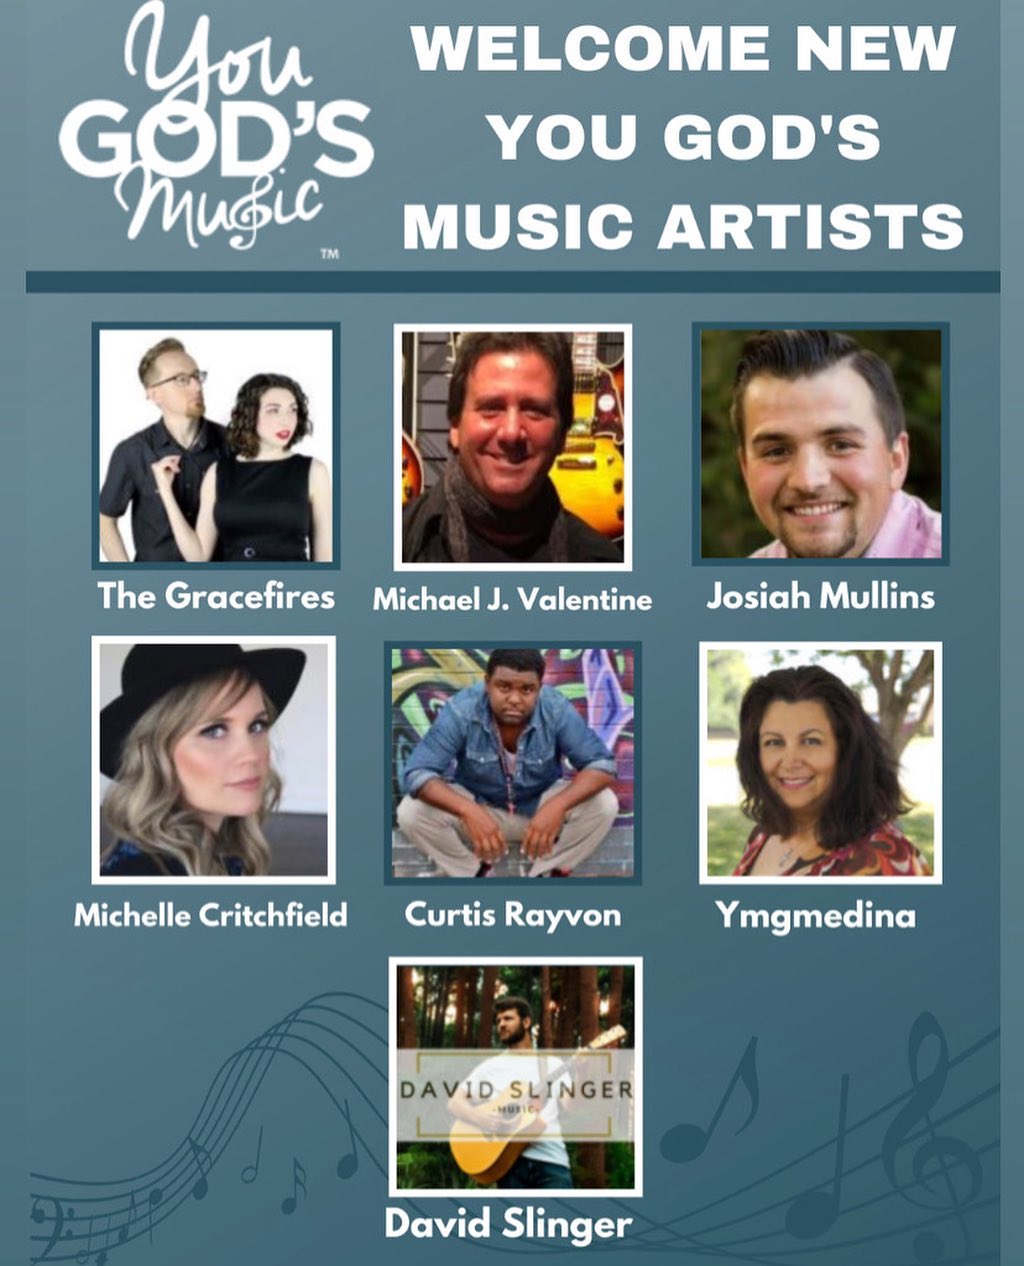 YGM would like to welcome seven new artists into the community!